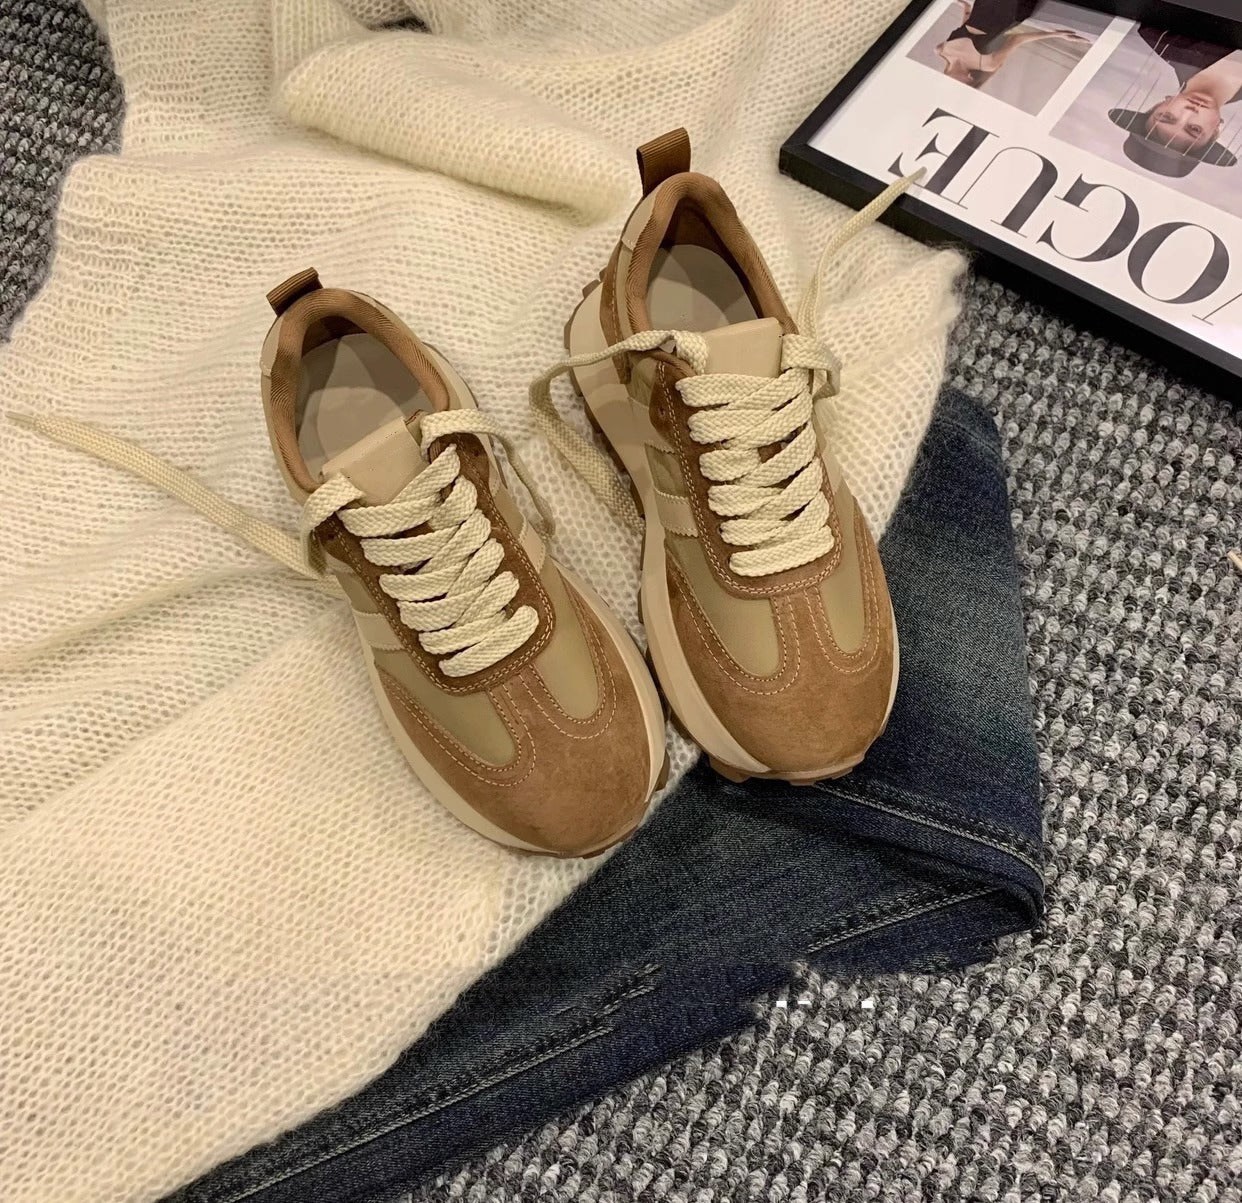 Sneakers  | Women Chunky Sole trainers | [option1] |  [option2]| thecurvestory.myshopify.com